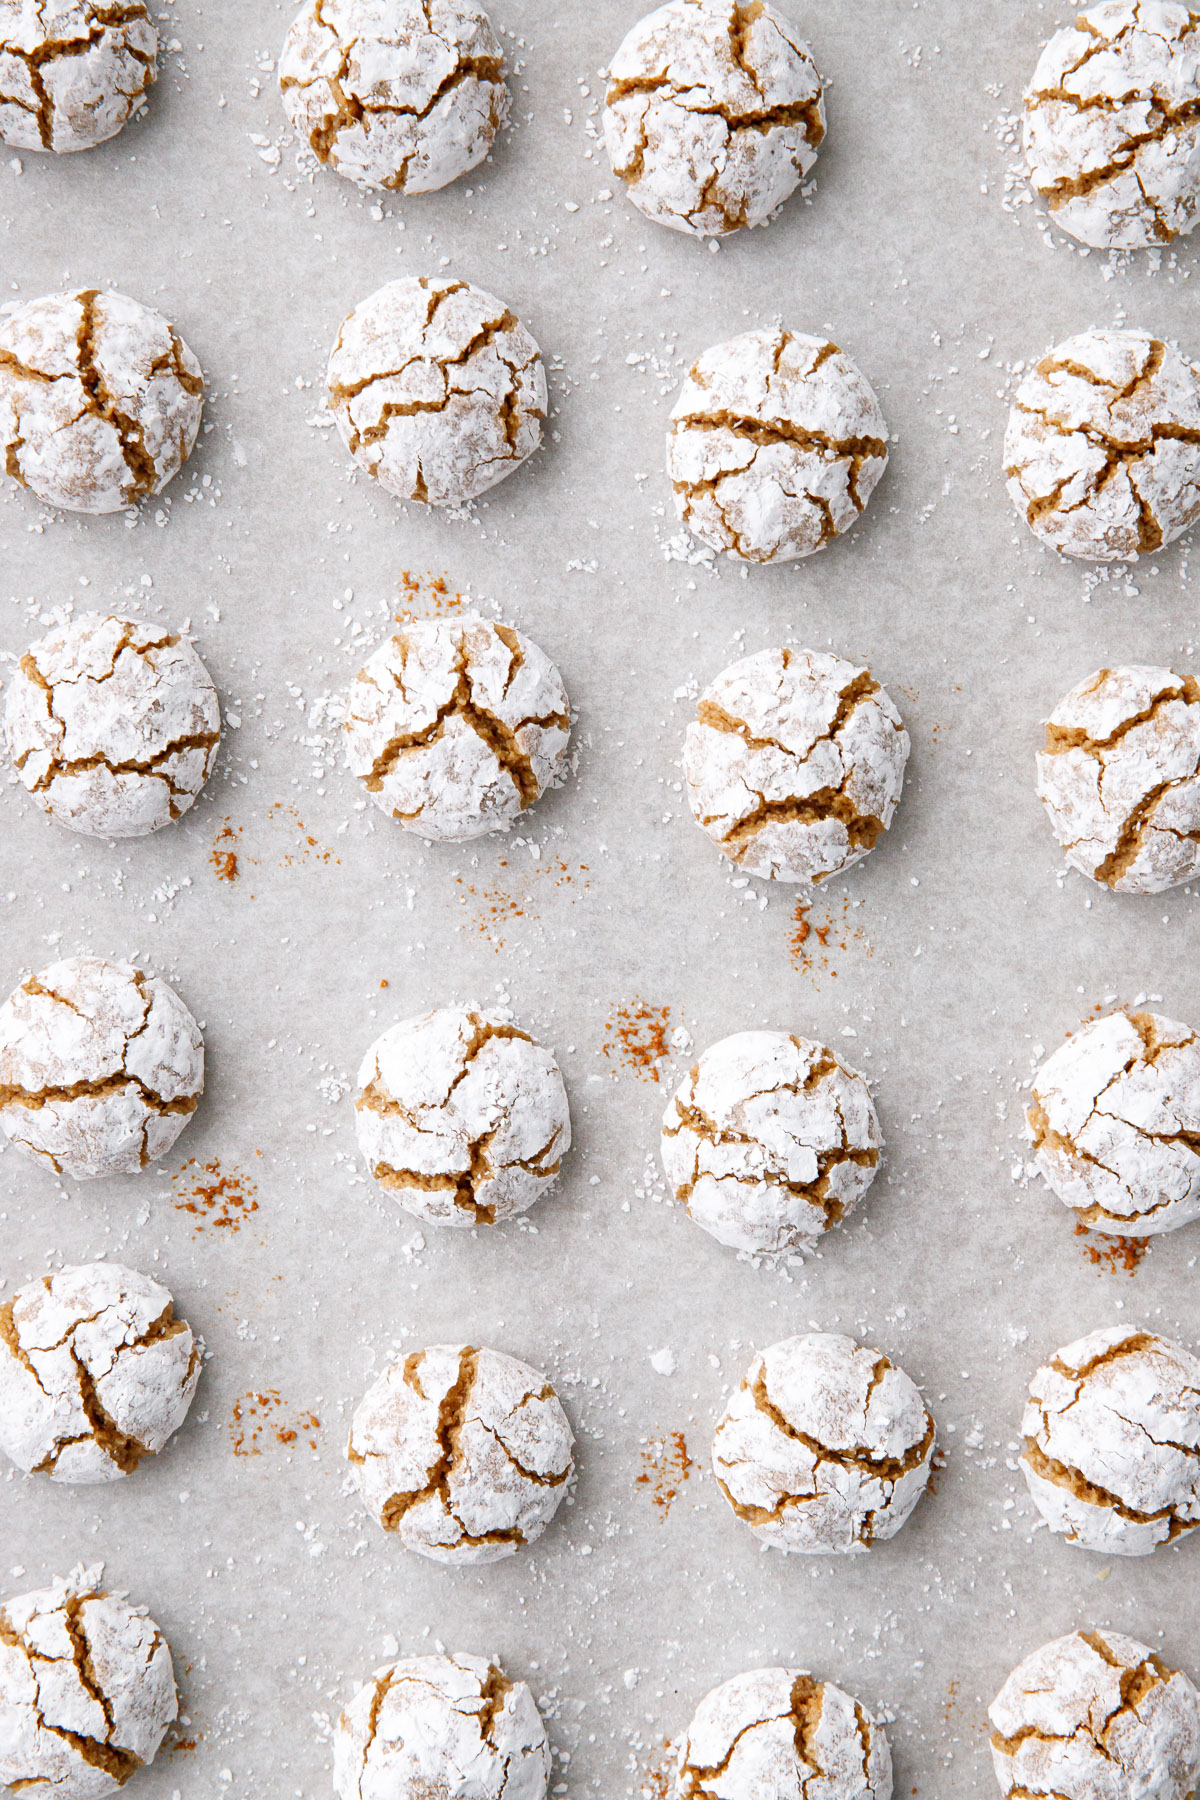 Overhead, neat rows of baked Gingerbread Amaretti Cookies coated in powdered sugar with a crackled appearance.